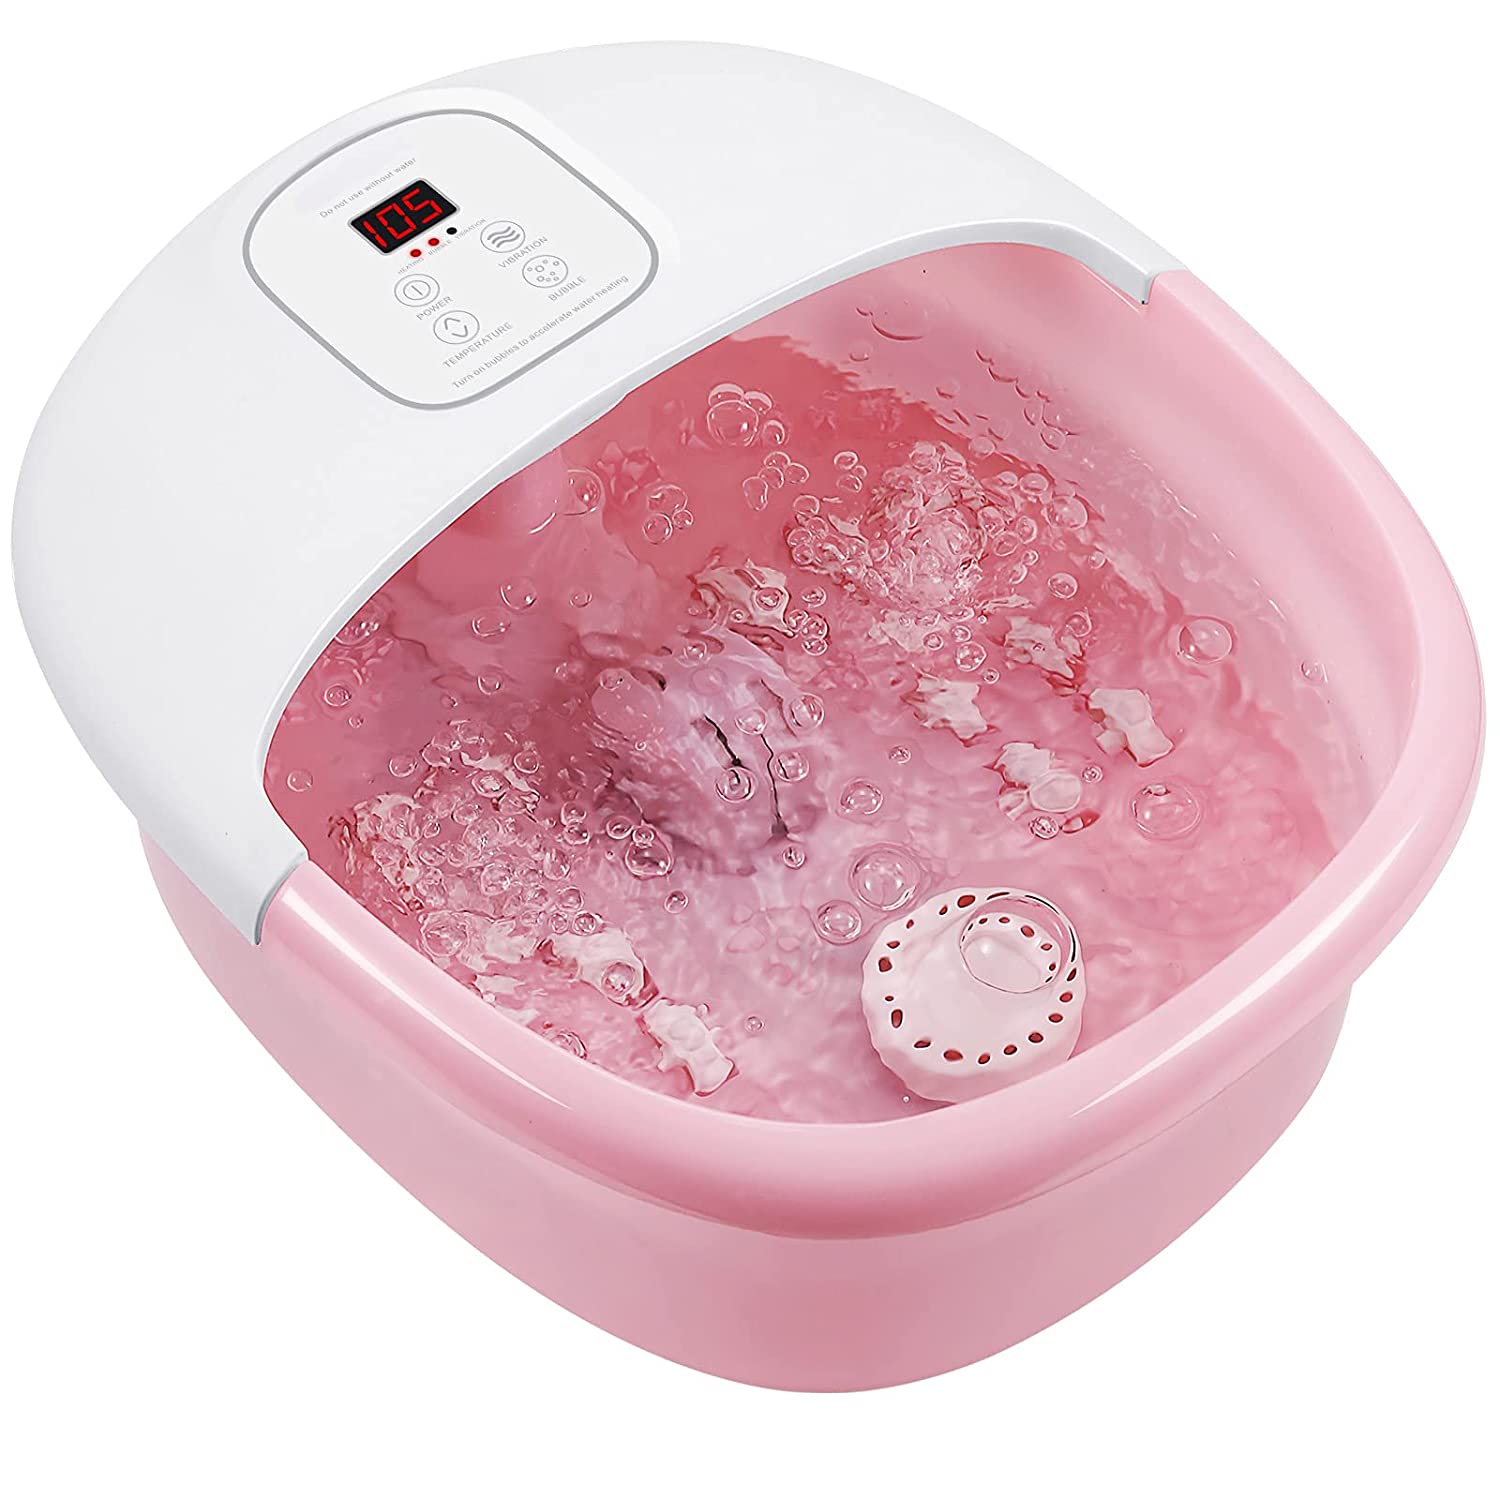 

Foot Spa Bath Massager with Heat, Adjustable Temperature Control , Bubbles and Vibration, Home Pedicure Tub for Relax